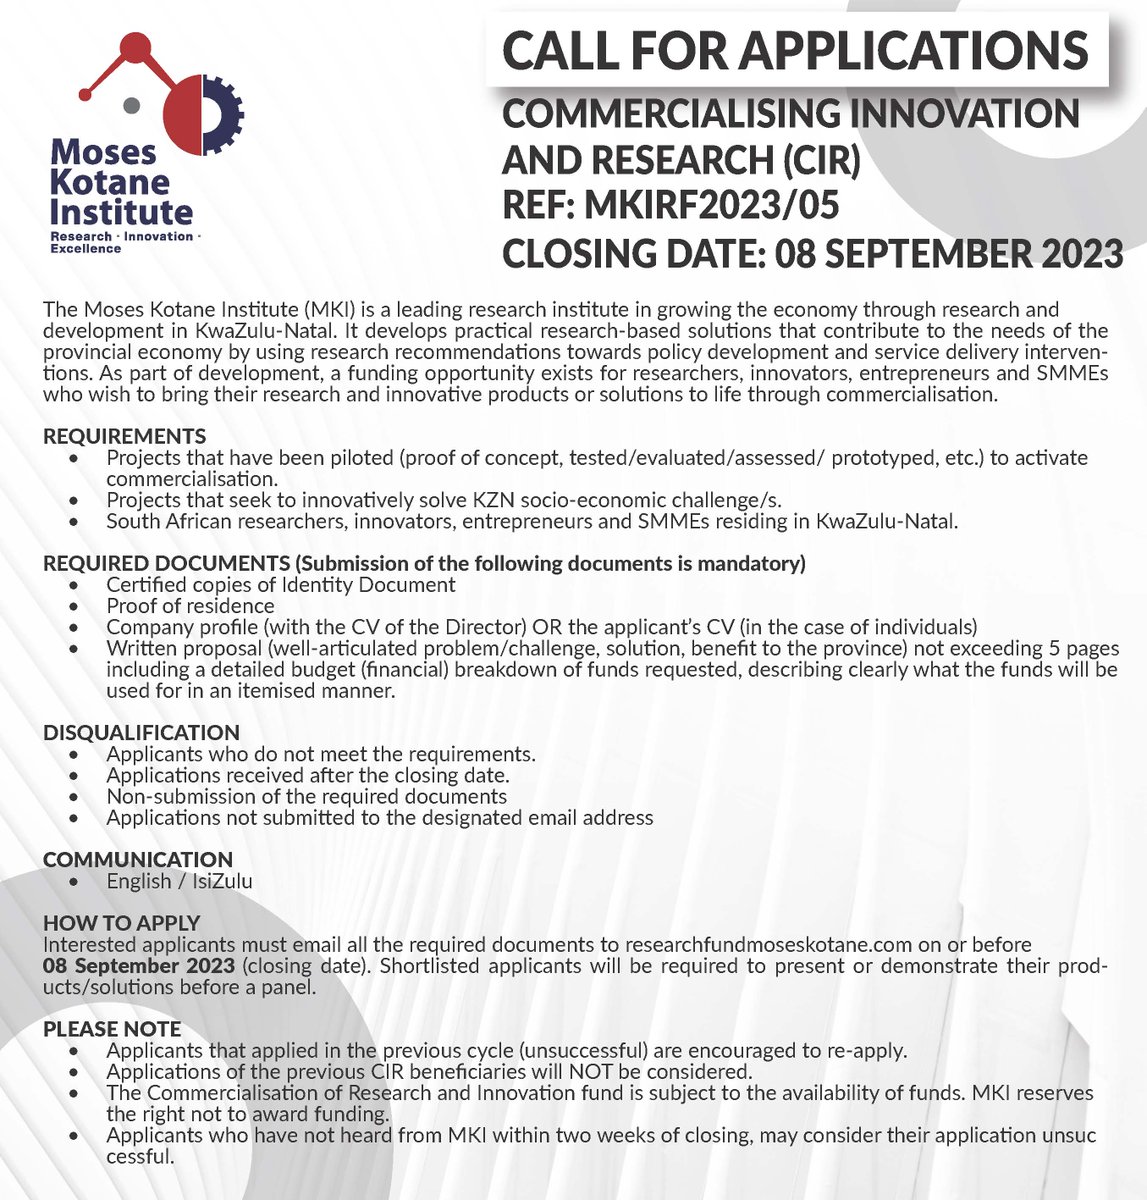 CALL FOR APPLICATIONS!!!
The Moses Kotane Institute (MKI) invites researchers, innovators, entrepreneurs, and SMMEs to apply for commercialization innovation and research (CIR) funding. Link: moseskotaneinstitute.com/call-for.../
#MKI
#innovation
#fundingopportunities